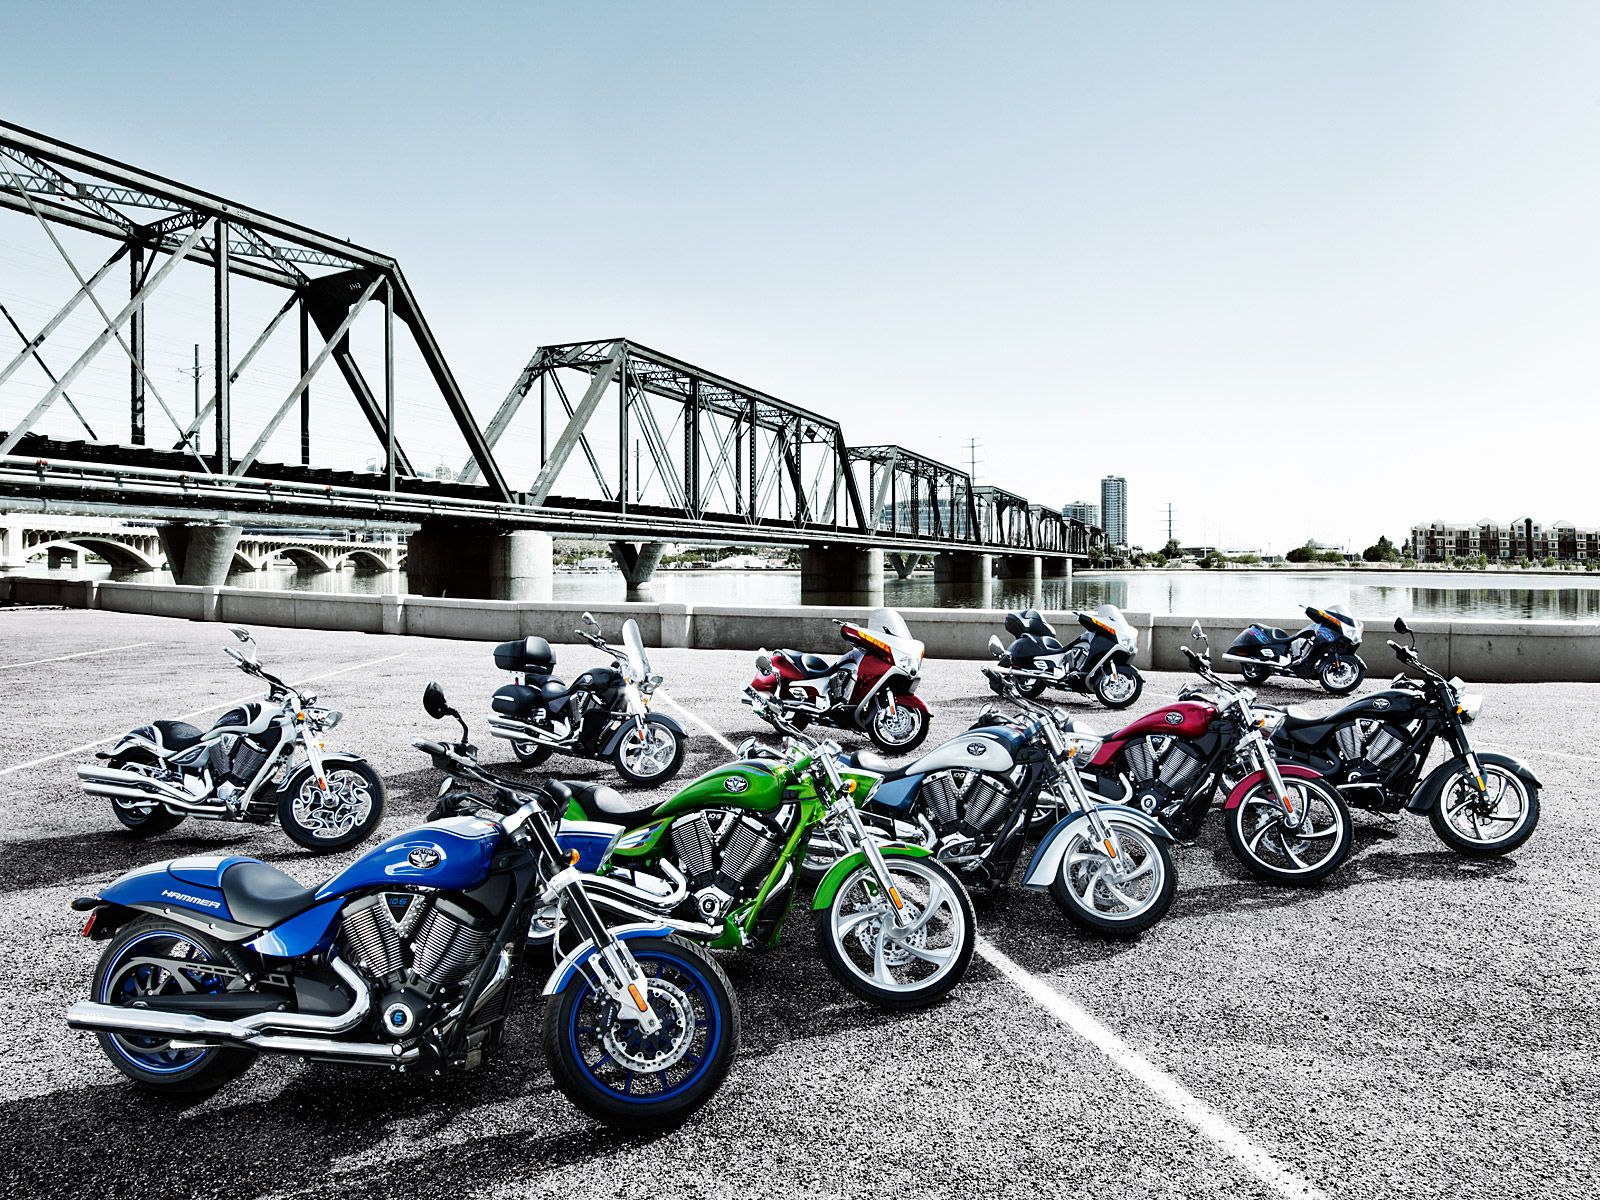  2009 Victory Lineup